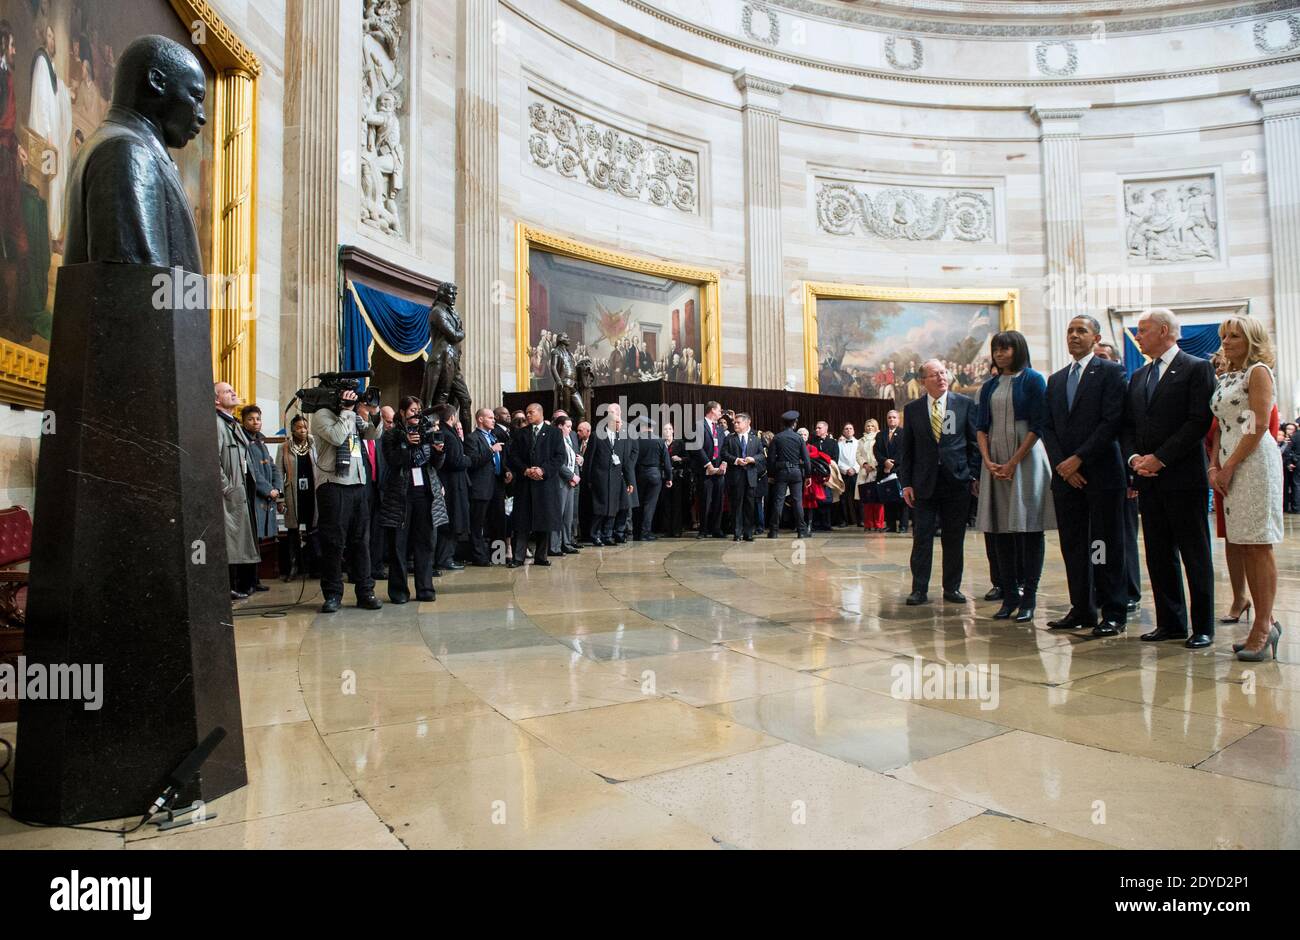 From left, Sen. Lamar Alexander, R-Tenn., First lady Michelle Obama, President Barack Obama, Speaker of the House John Boehner, R-Ohio, Vice President Joe Biden, House Minority Leader Nancy Pelosi, D-Calif., and Jill Biden pause to pay their respects at the Martin Luther King, Jr. statue in the Capitol rotunda as they leave the 2013 Inaugural Luncheon following President Obama's inauguration in Washington on January 21, 2013. Photo by Bill Clark/ABACAUSA.COM Stock Photo